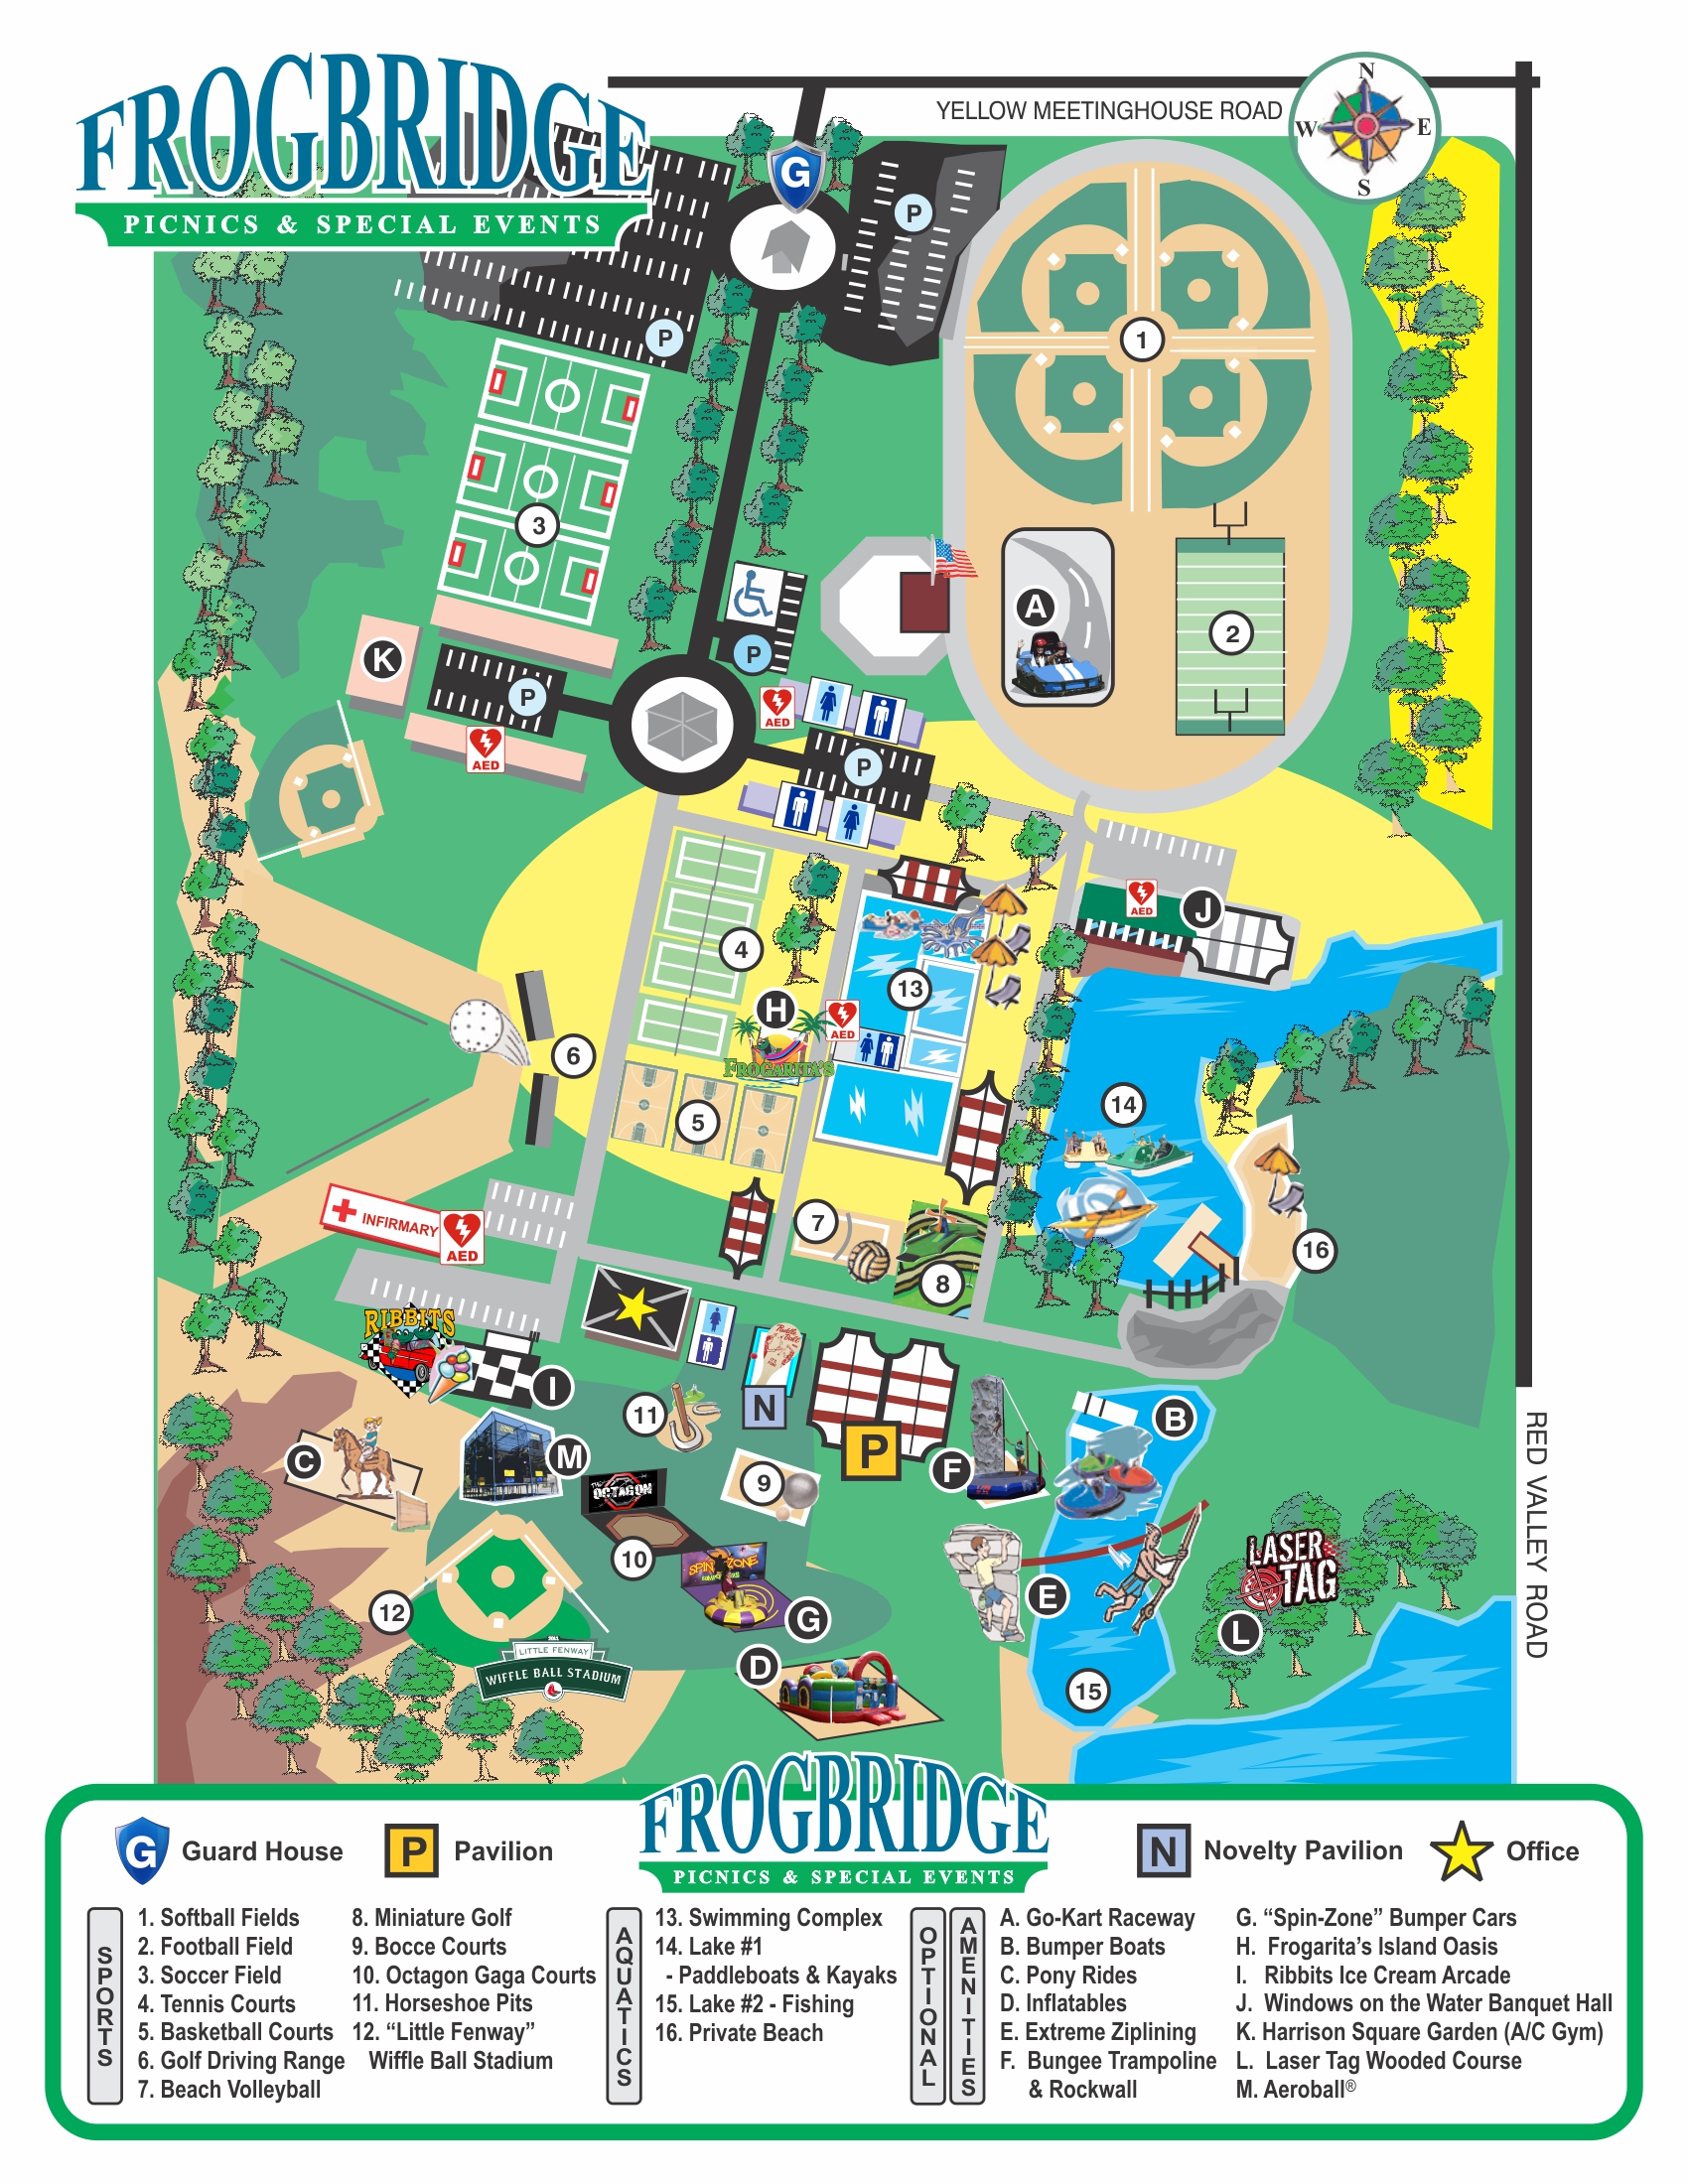 Facilities Map: View All 86 Acres of Fun at Frogbridge in Central, NJ